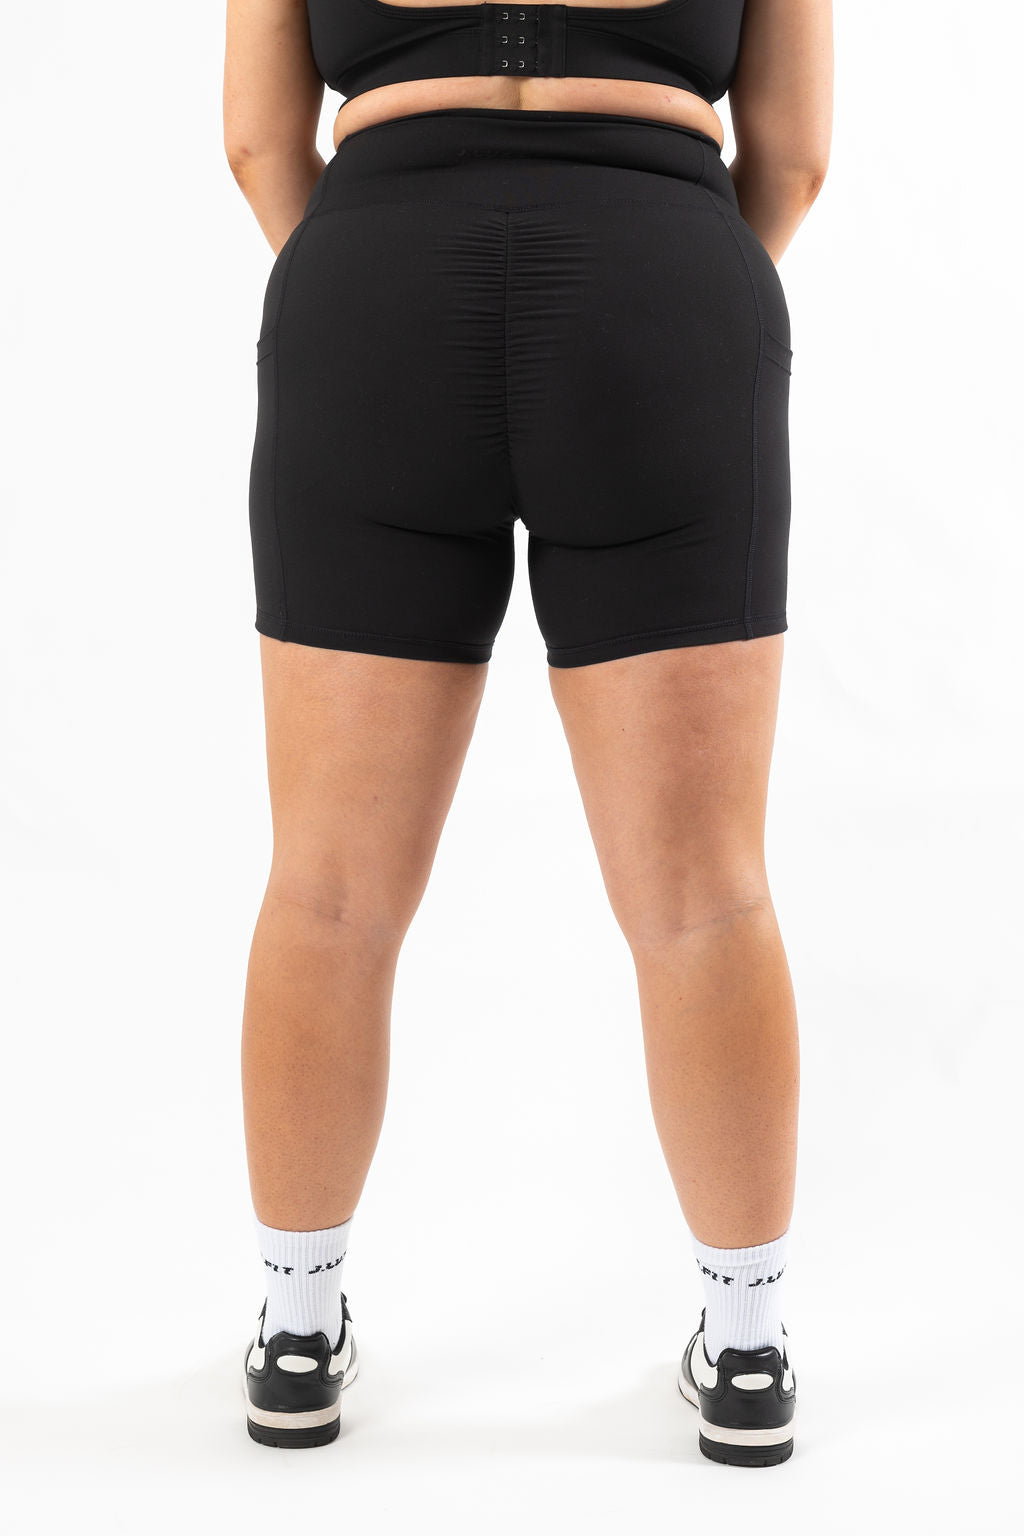 Core High Waisted Black Shorts With Pockets